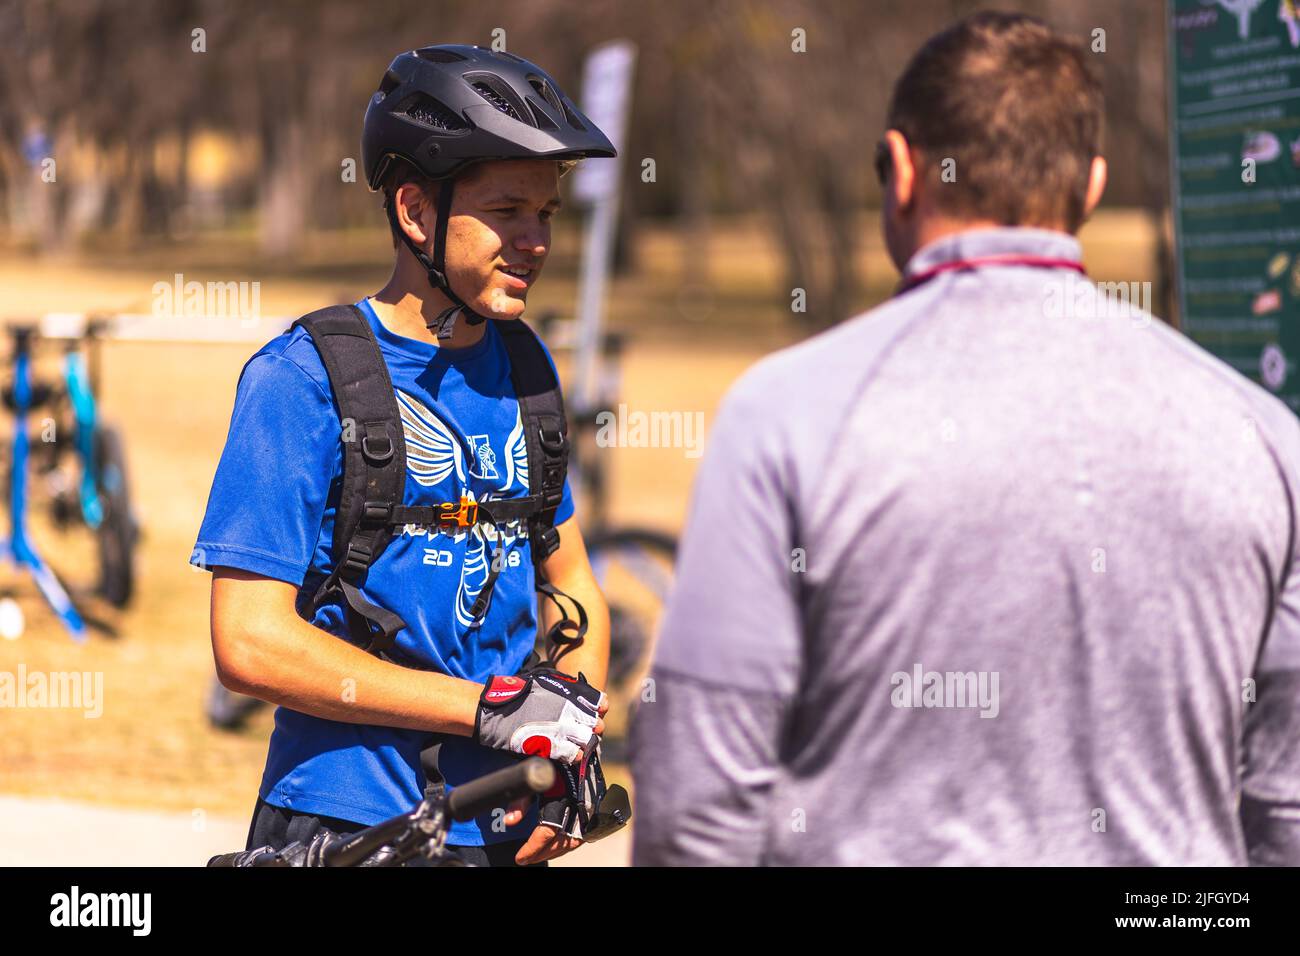 A Caucasian man getting ready to ride a bike in a race held in the DFW metroplex in Texas Stock Photo